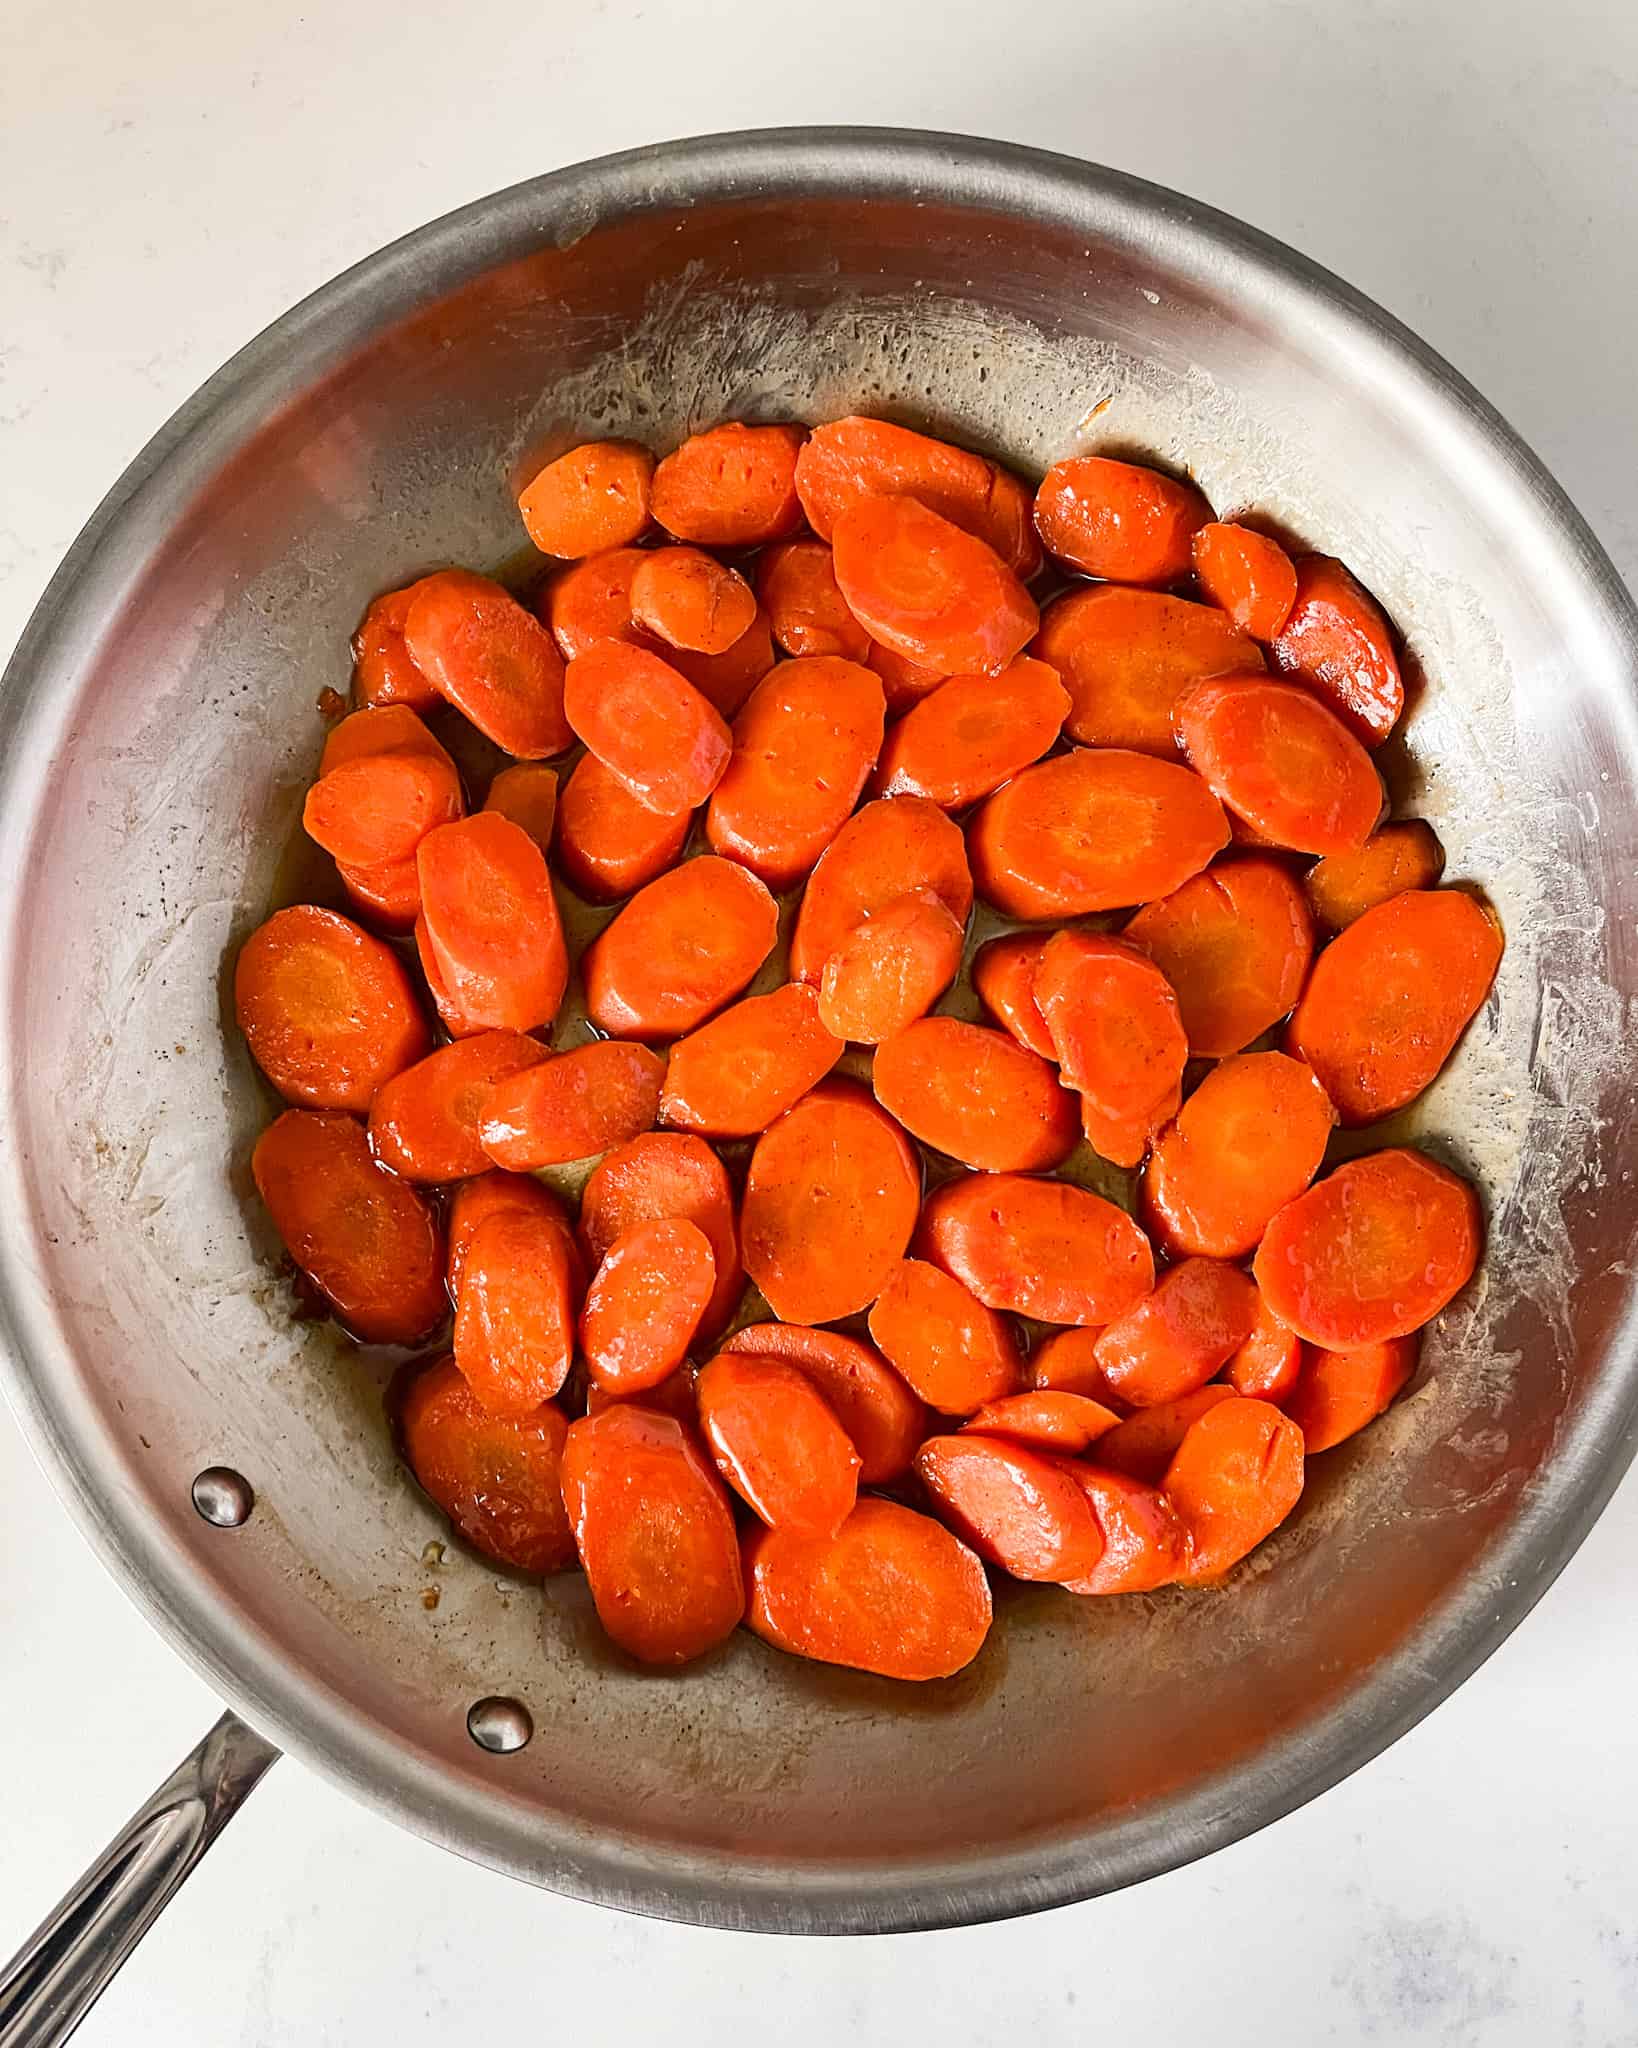 Cooked glazed carrots in a skillet.